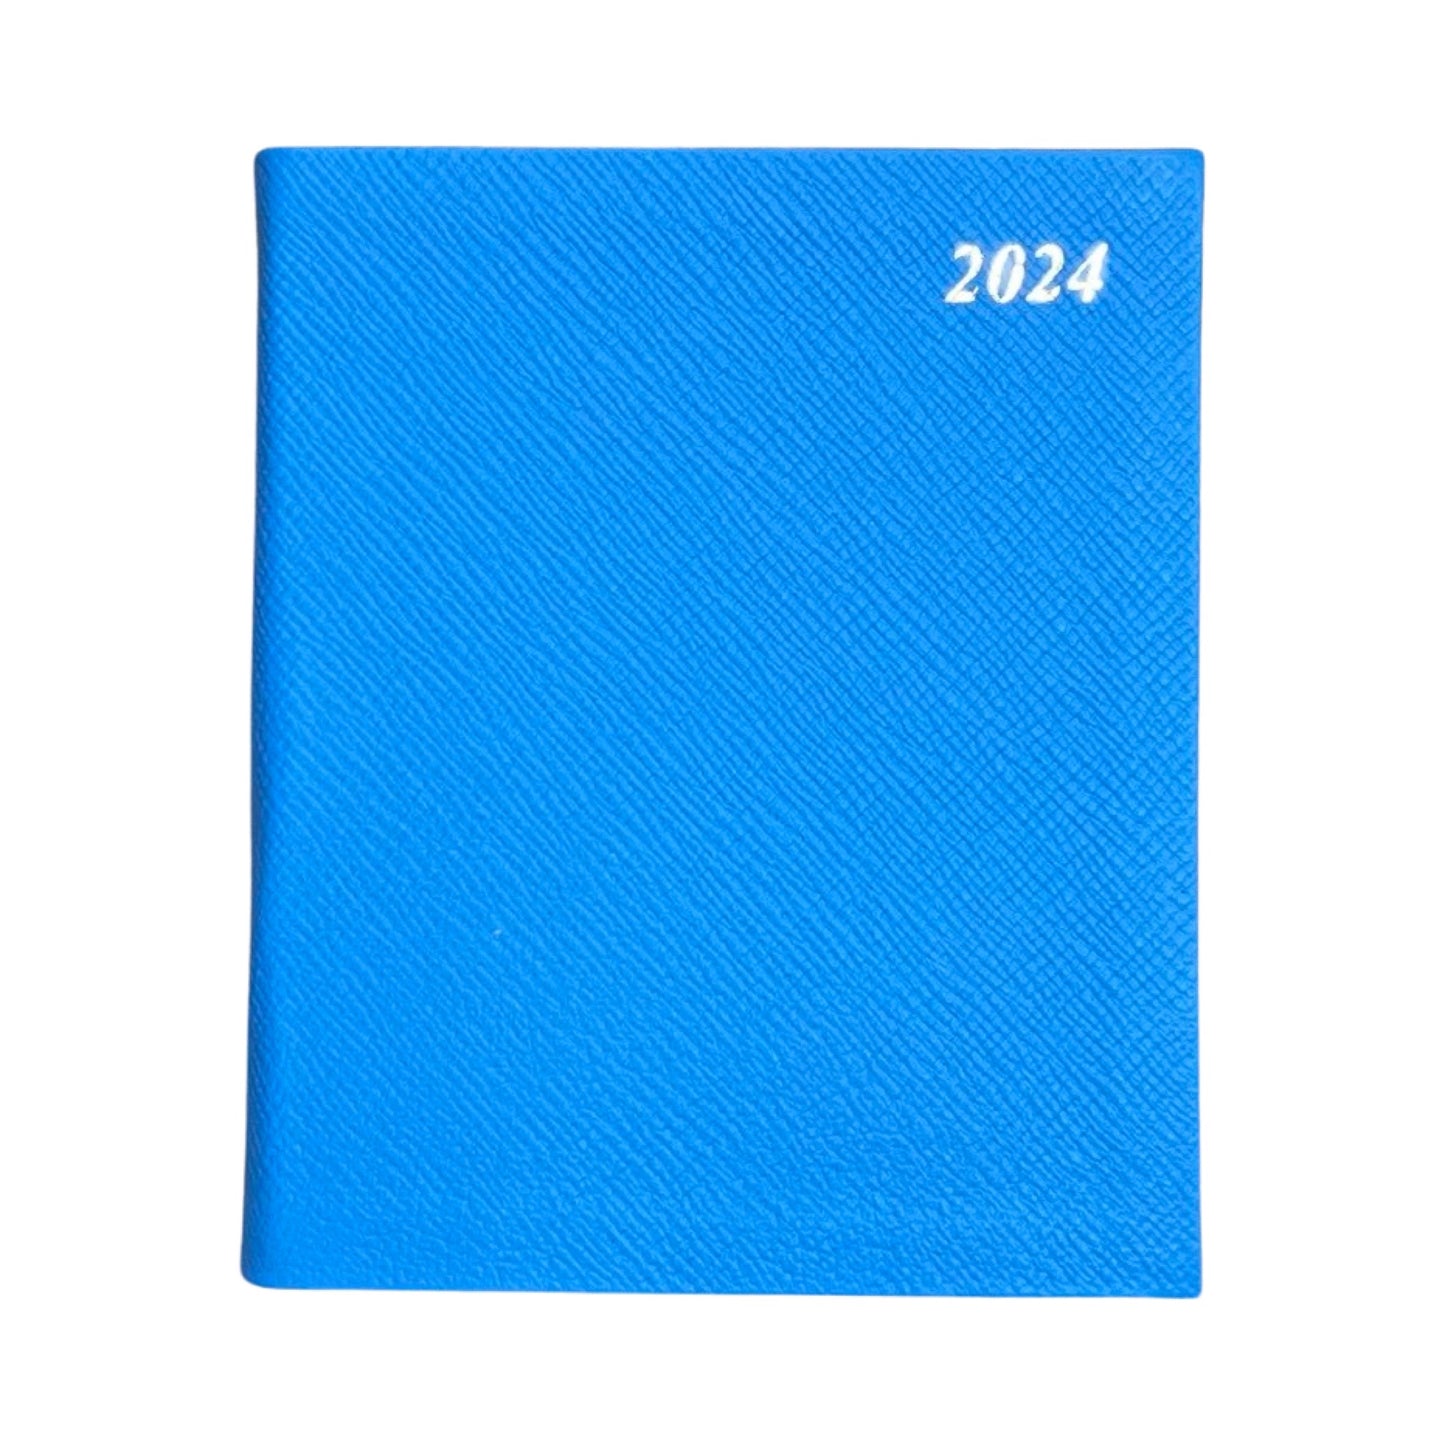 2024 CROSSGRAIN Leather Pocket Calendar Book | 4 x 2.5" | Thick, One Day Per Page | D142L